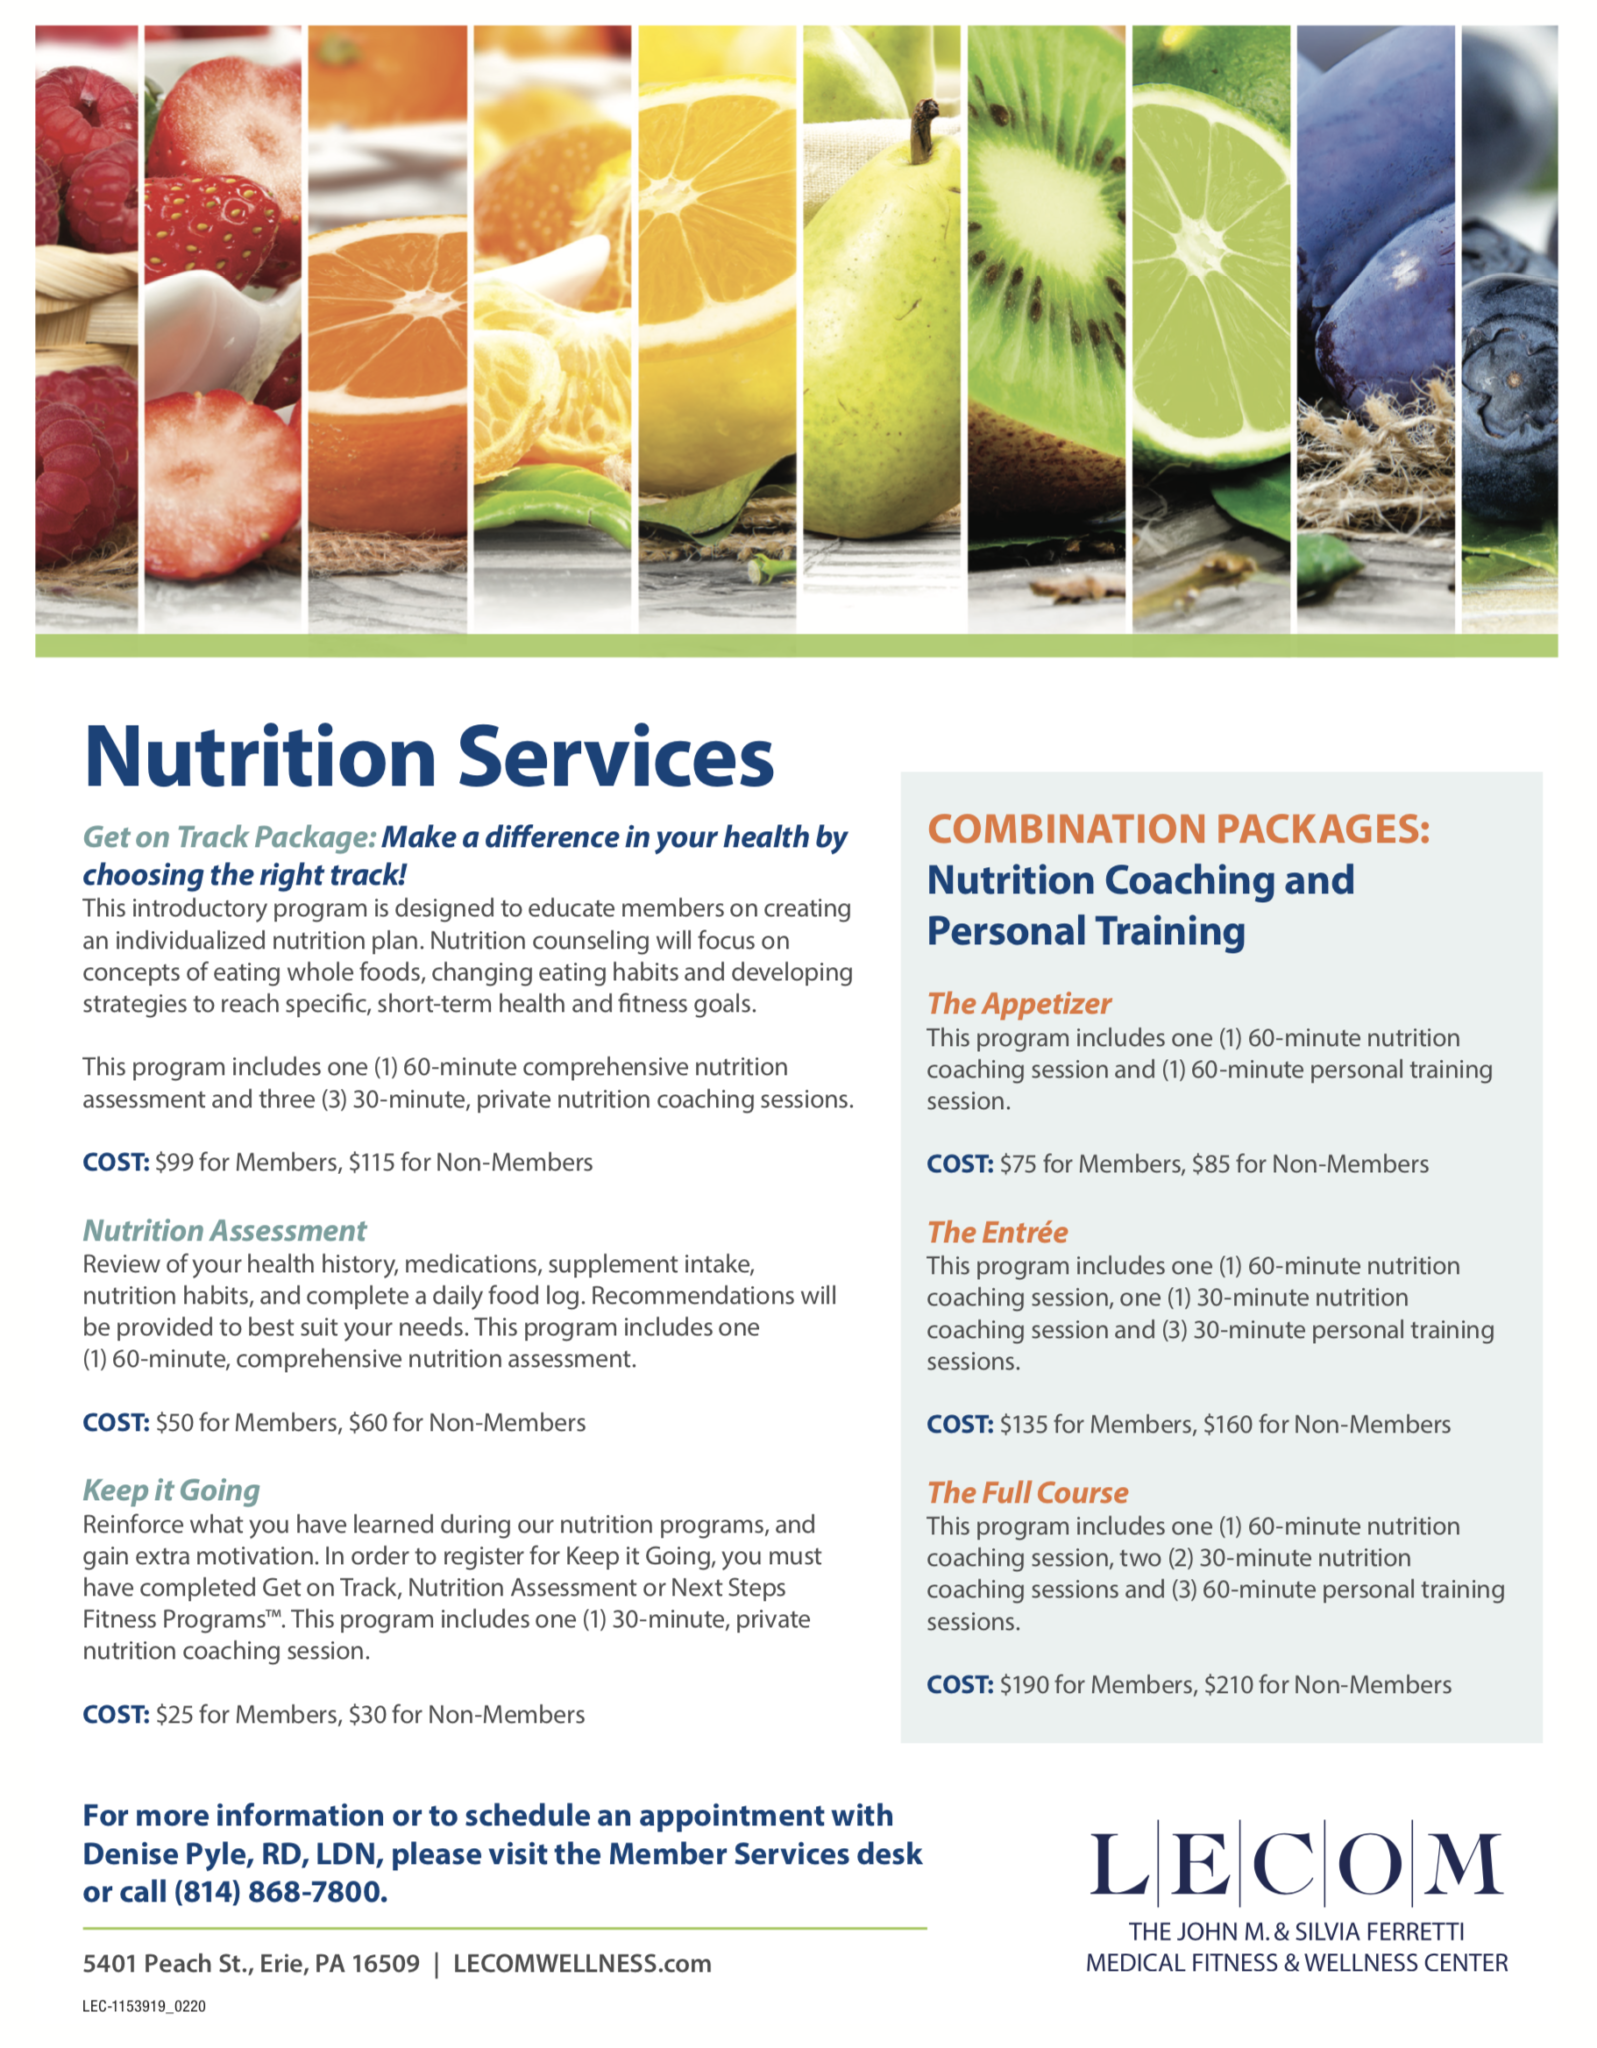 Nutritional Counseling Medical Fitness & Wellness Center